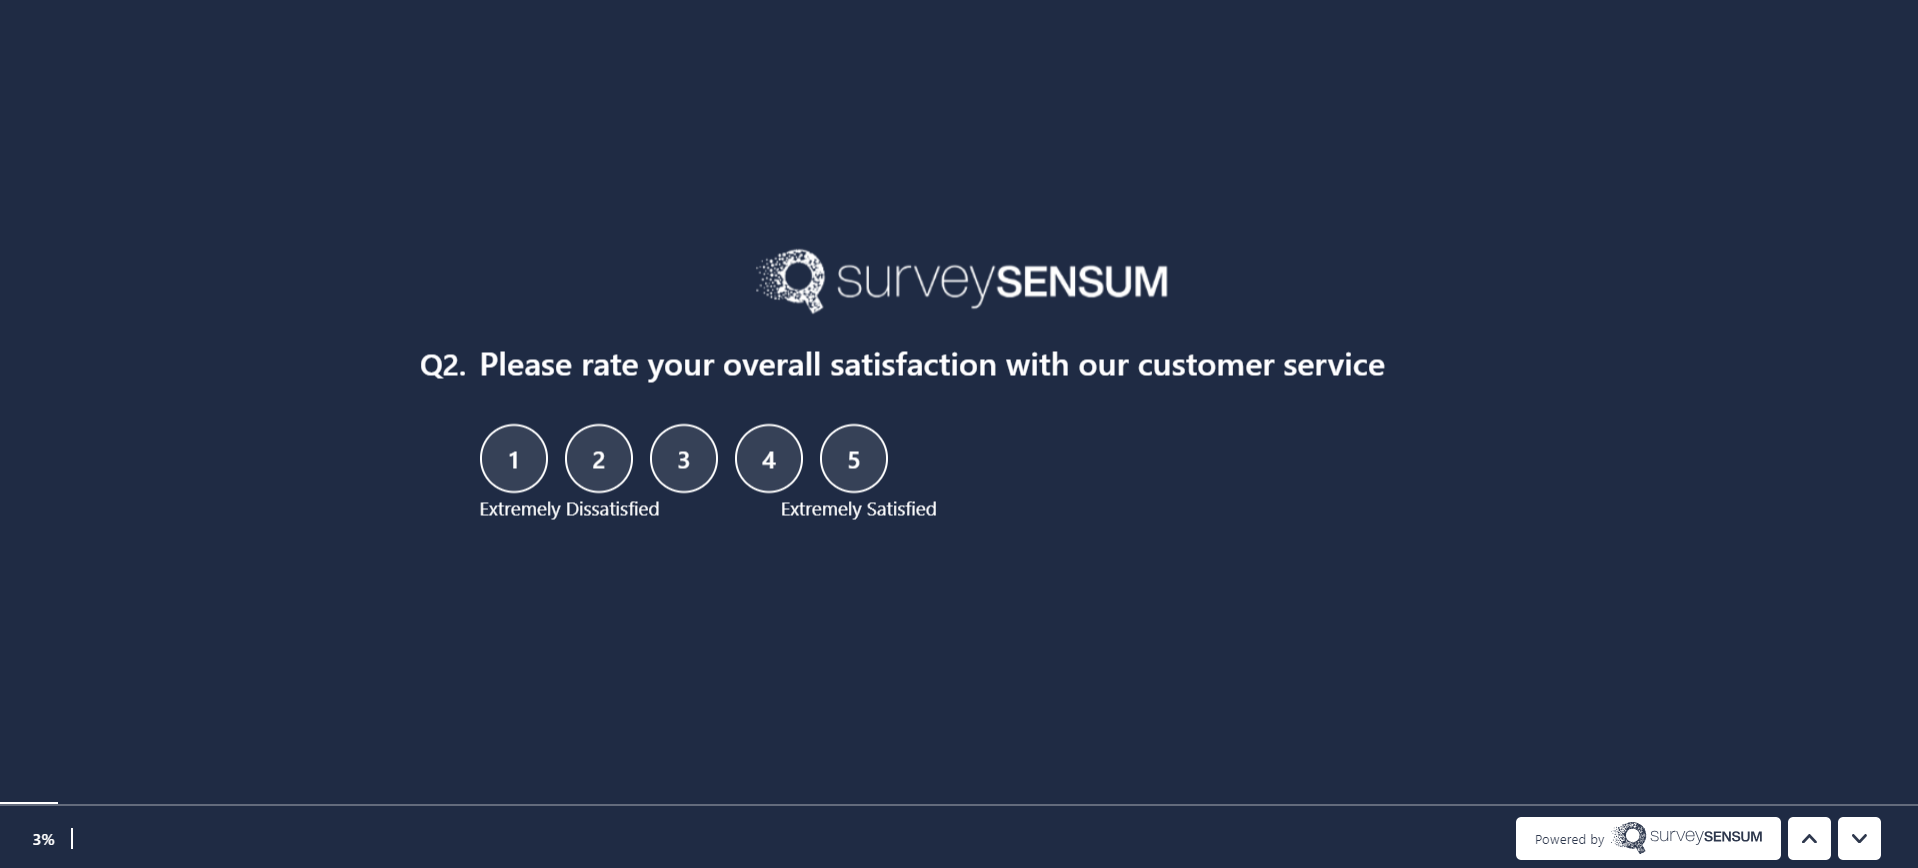 This is the image of a survey with a Likert scale survey type.